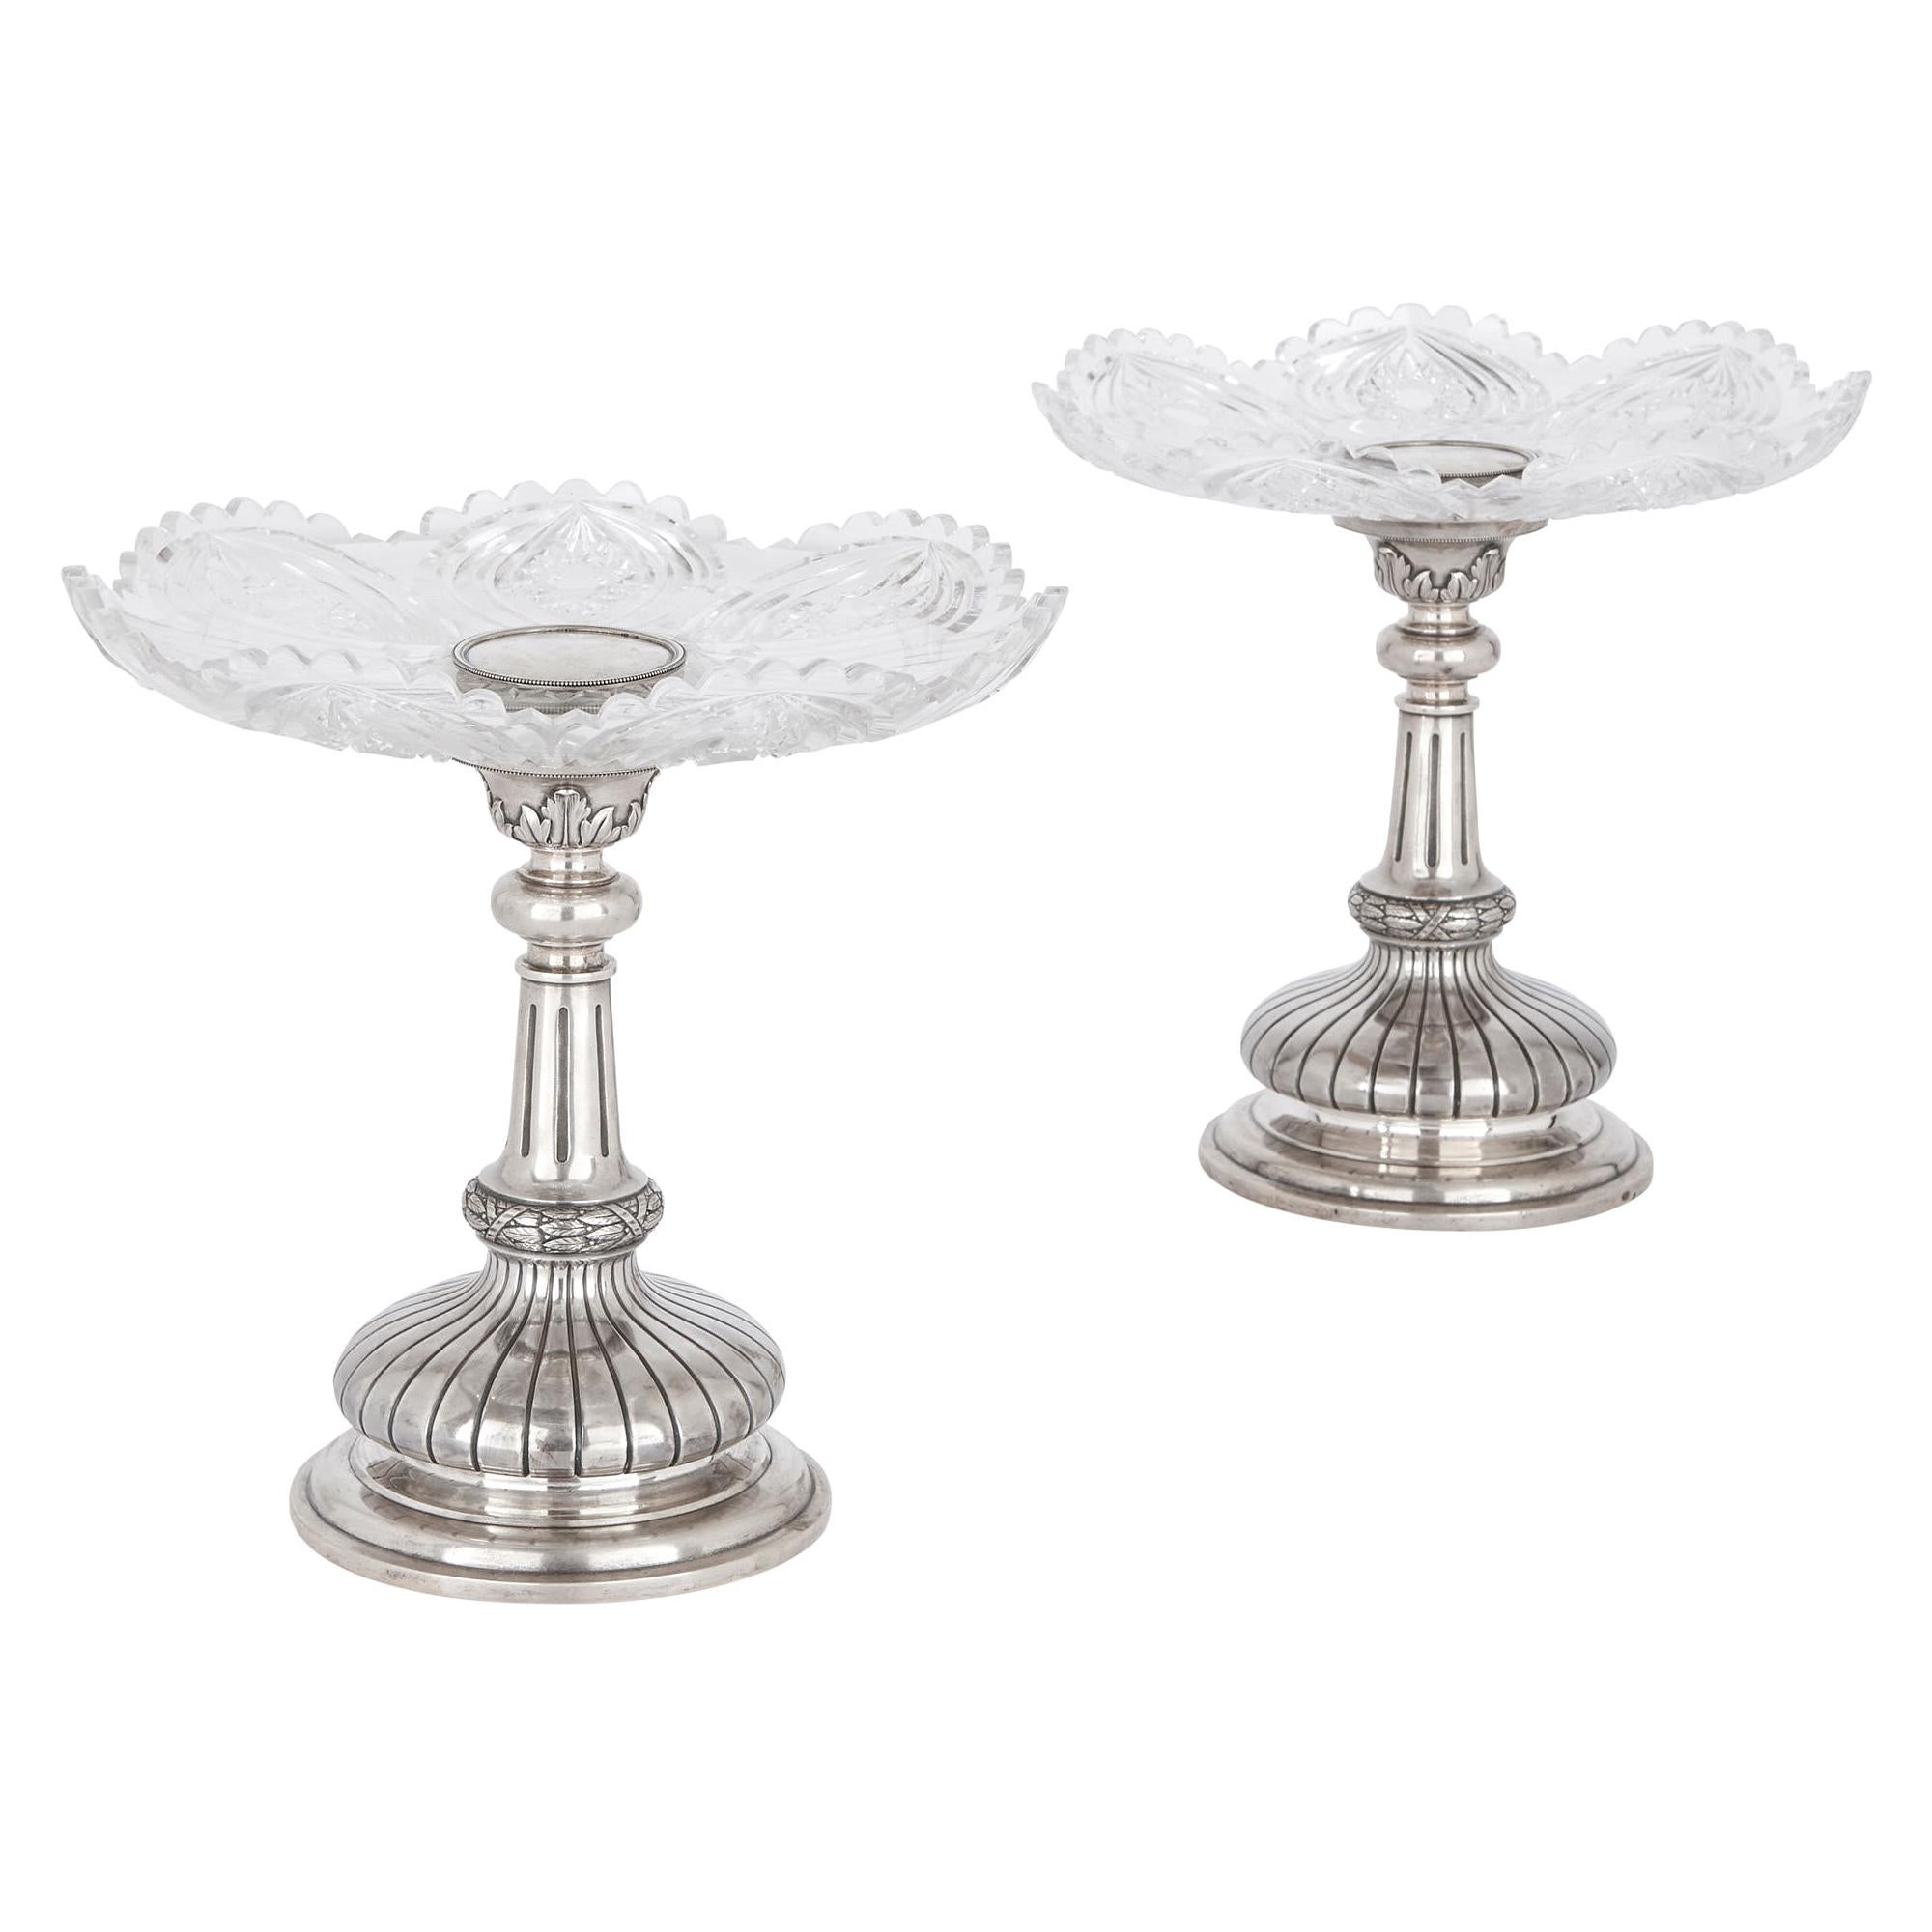 Two Russian Cut Glass and Silver Centrepiece Tazze